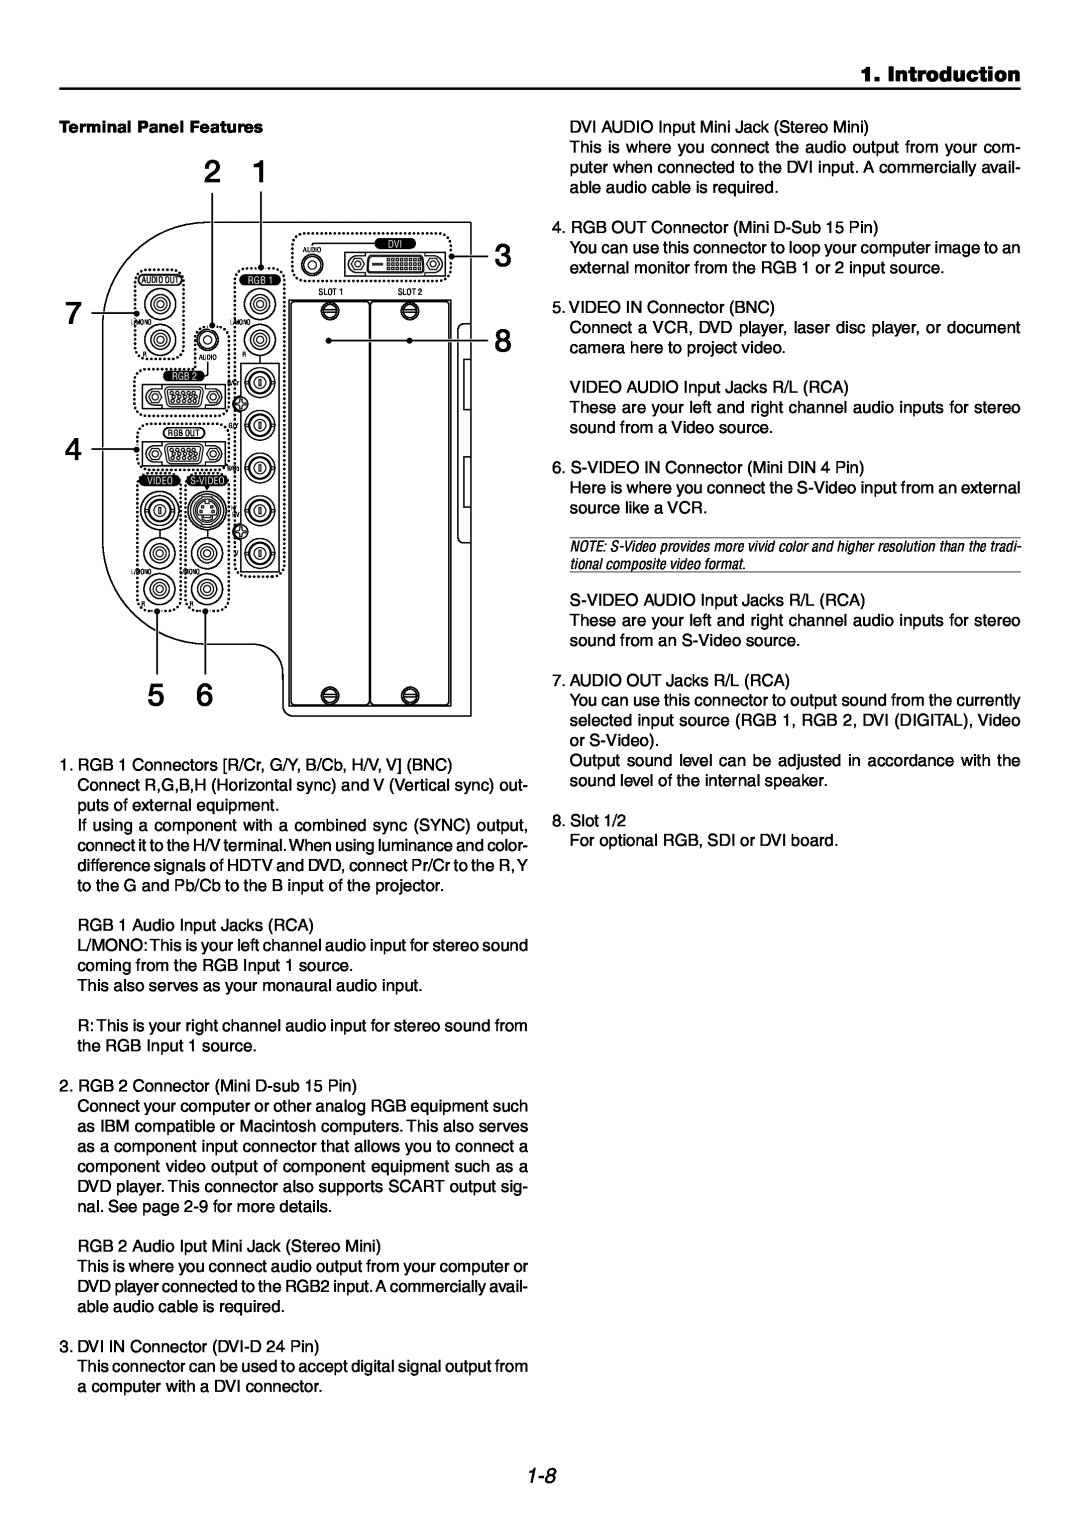 NEC GT6000 user manual Introduction, Terminal Panel Features 